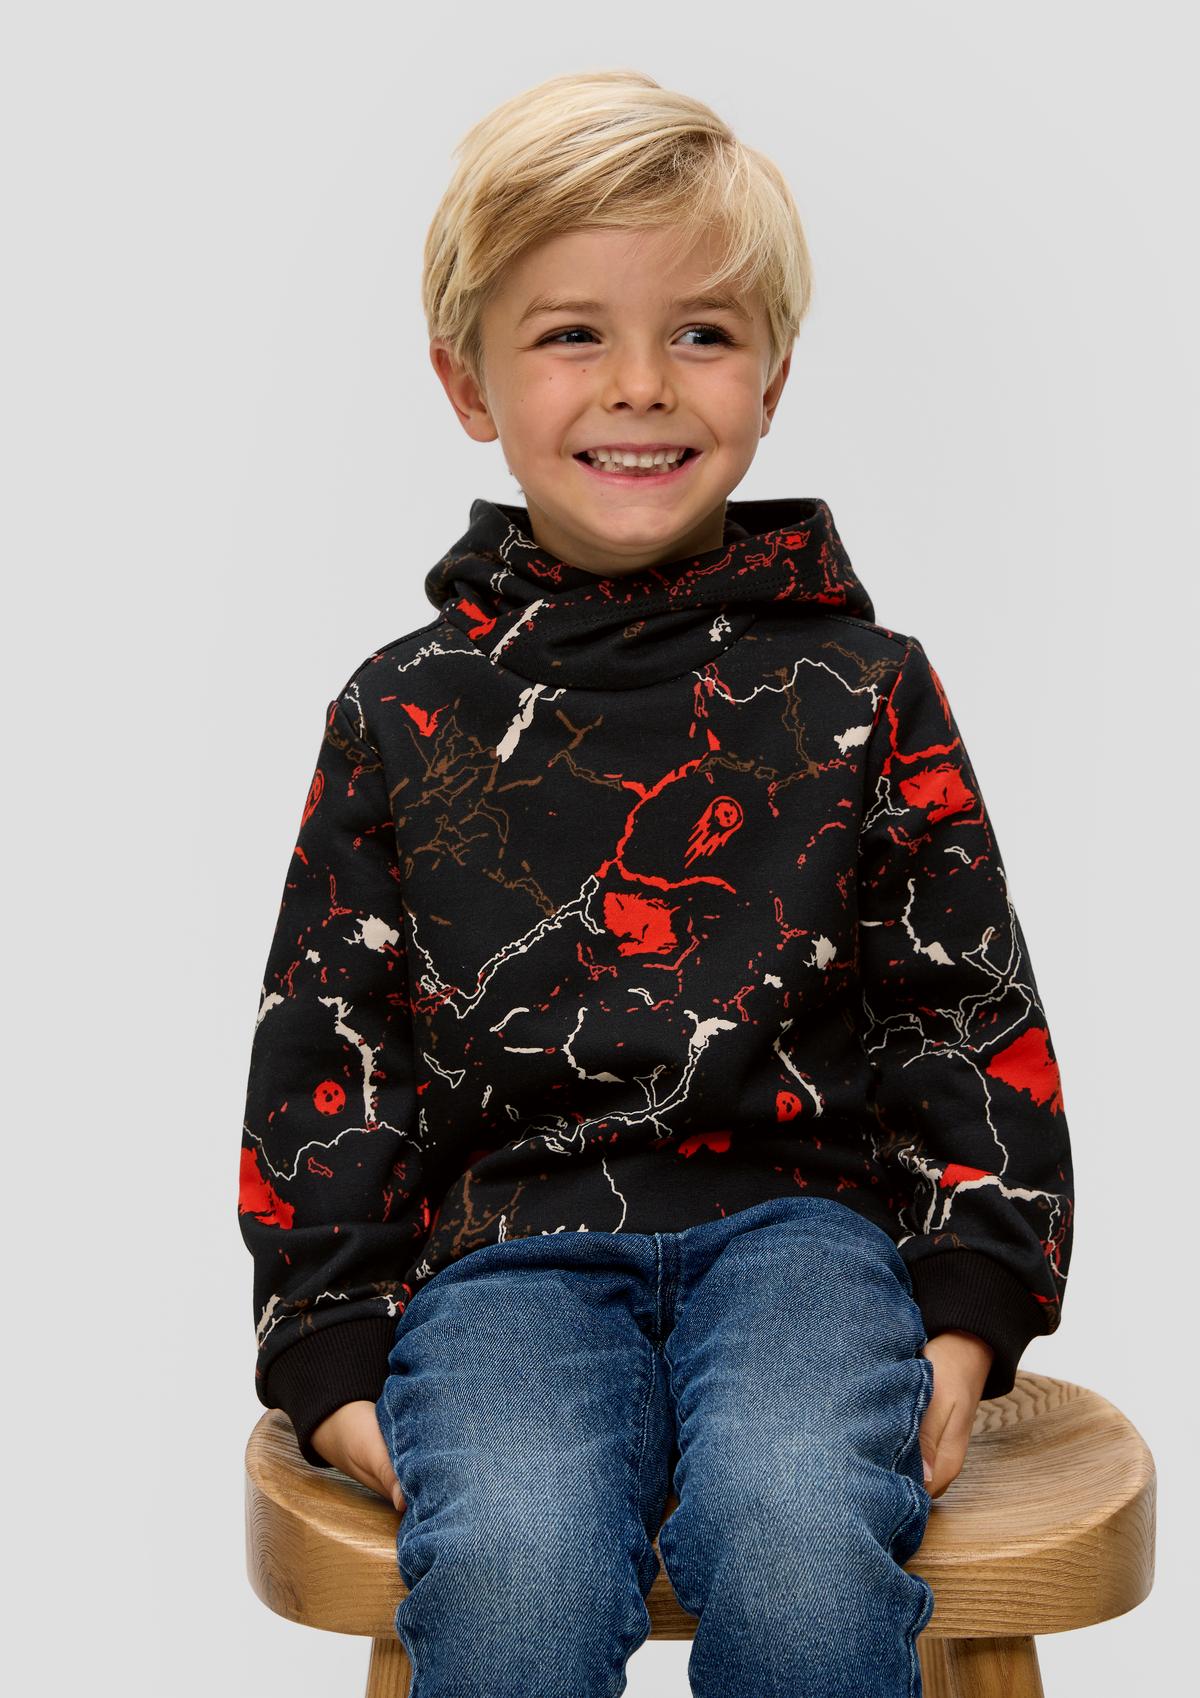 for online Sweatshirts knitwear and boys